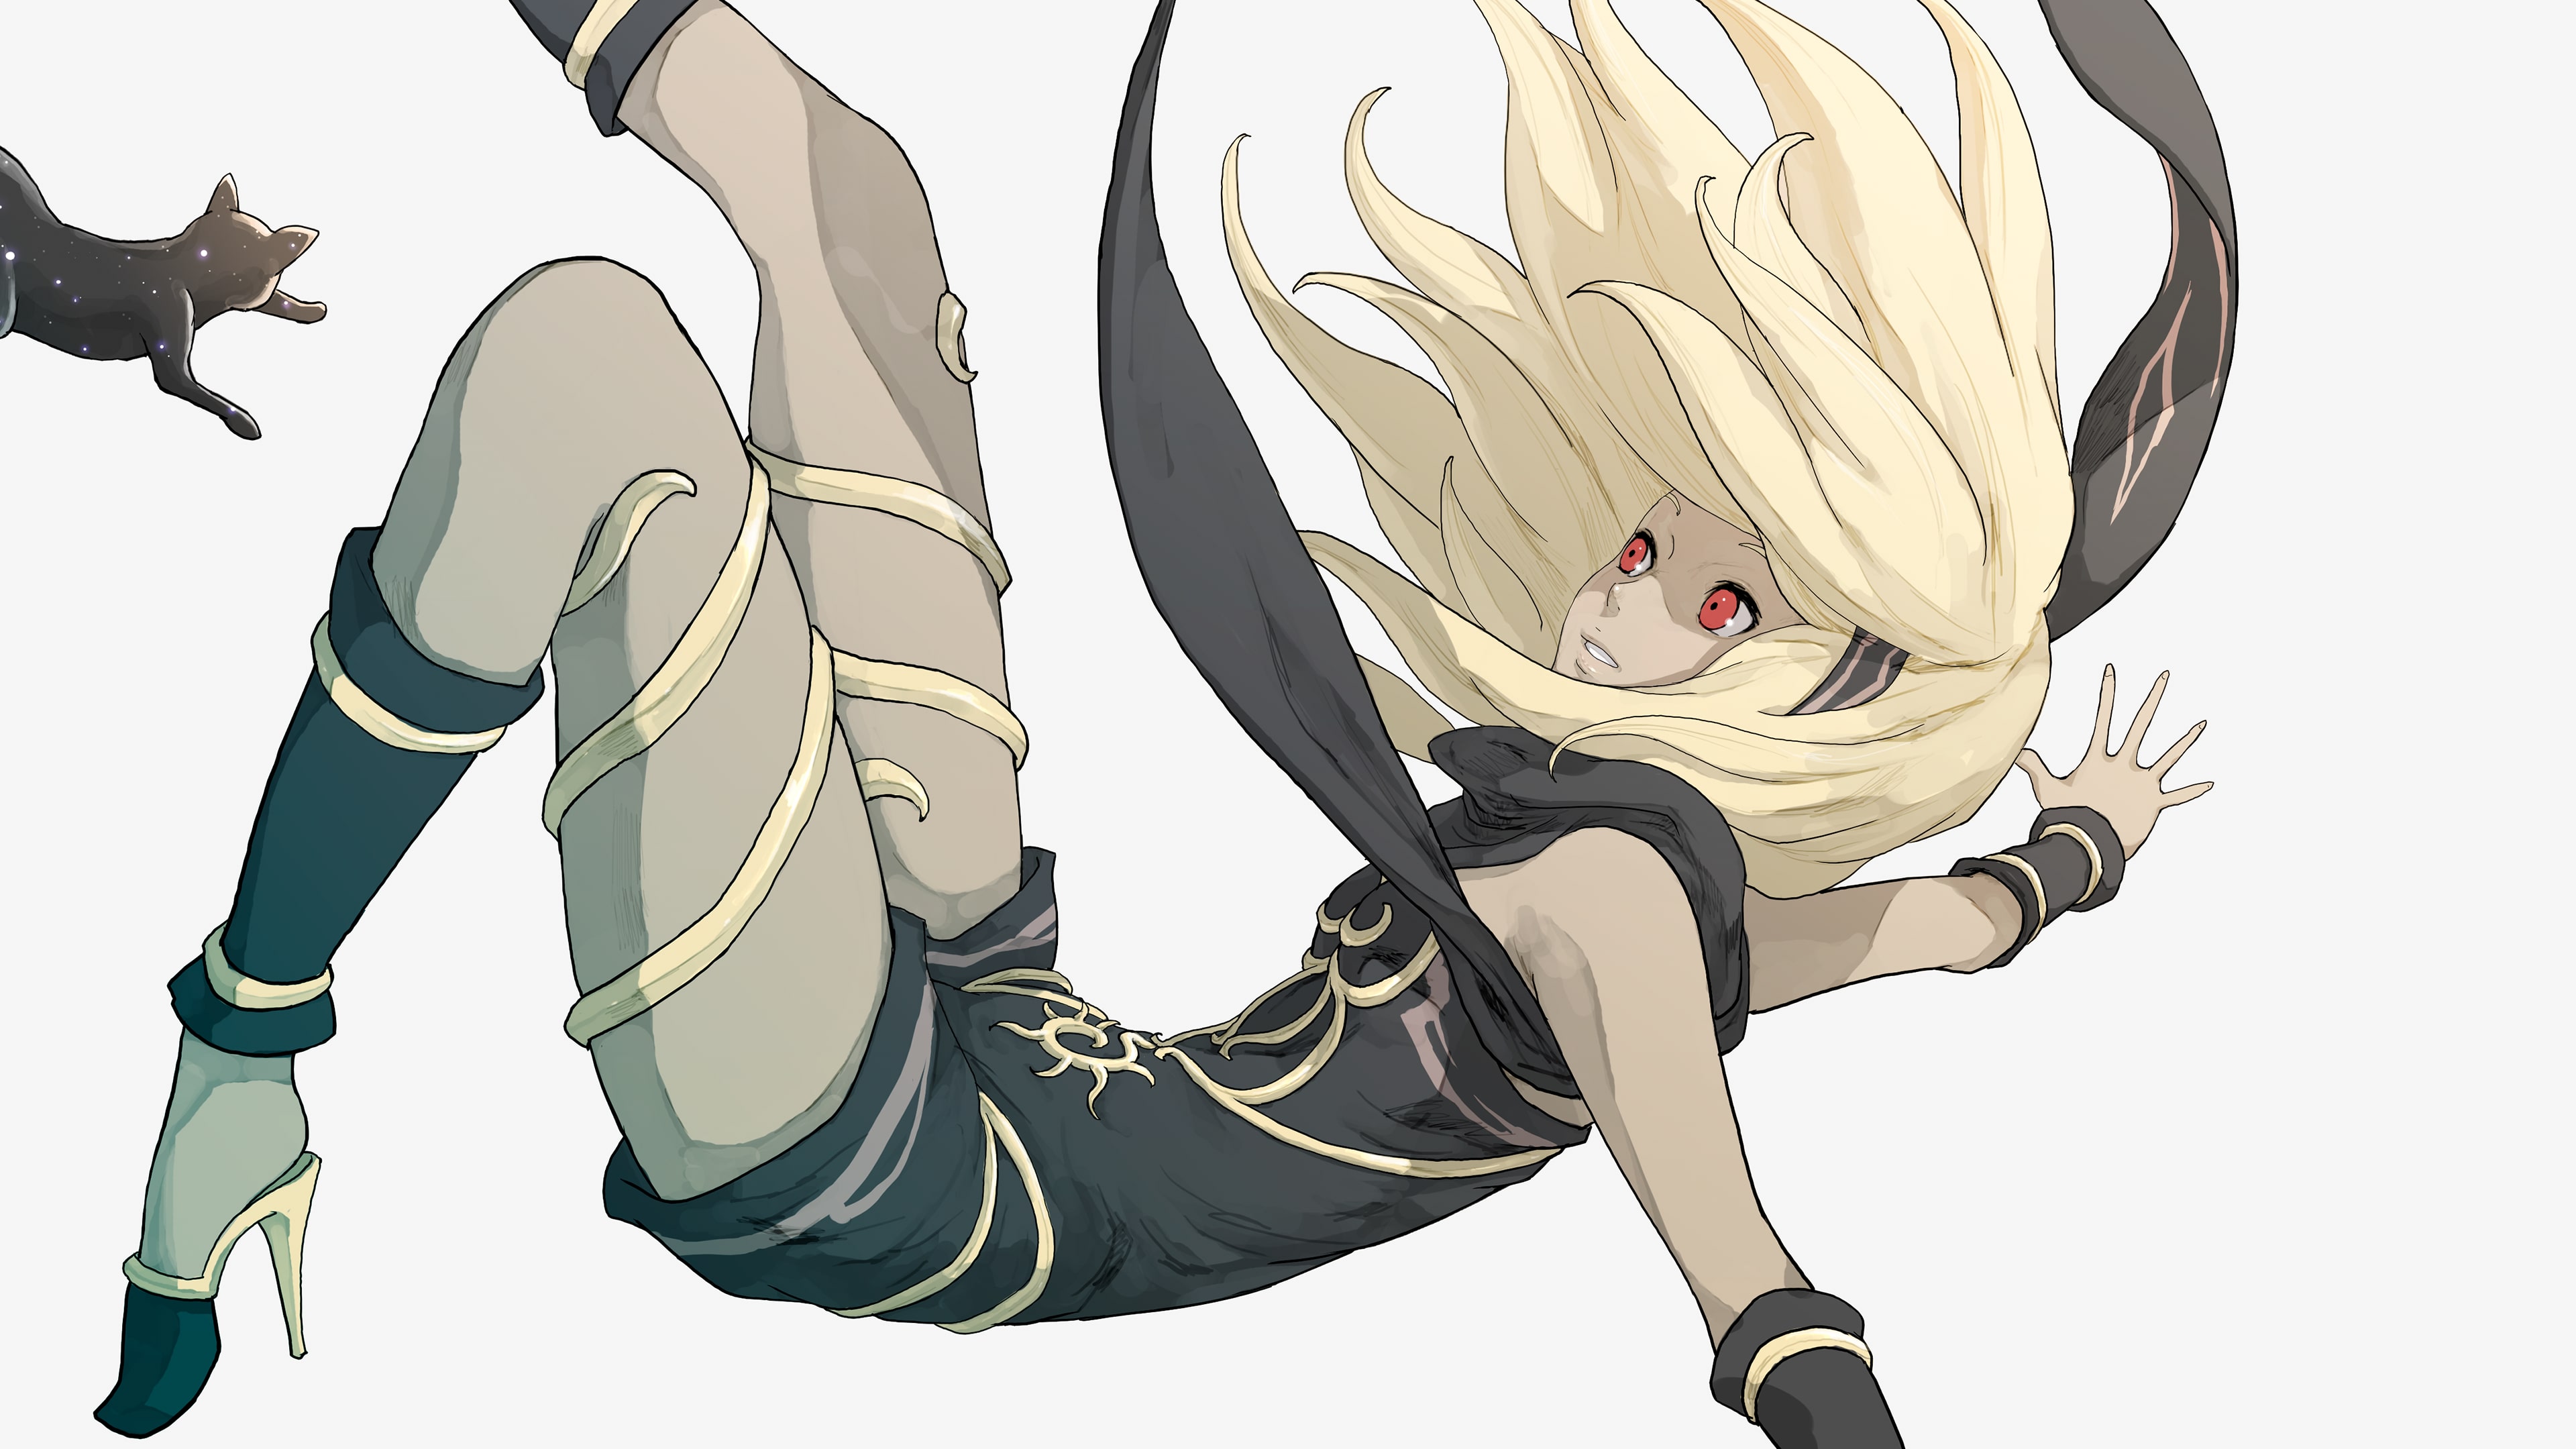 Gravity Rush Remastered on Playstation 4 online sale.